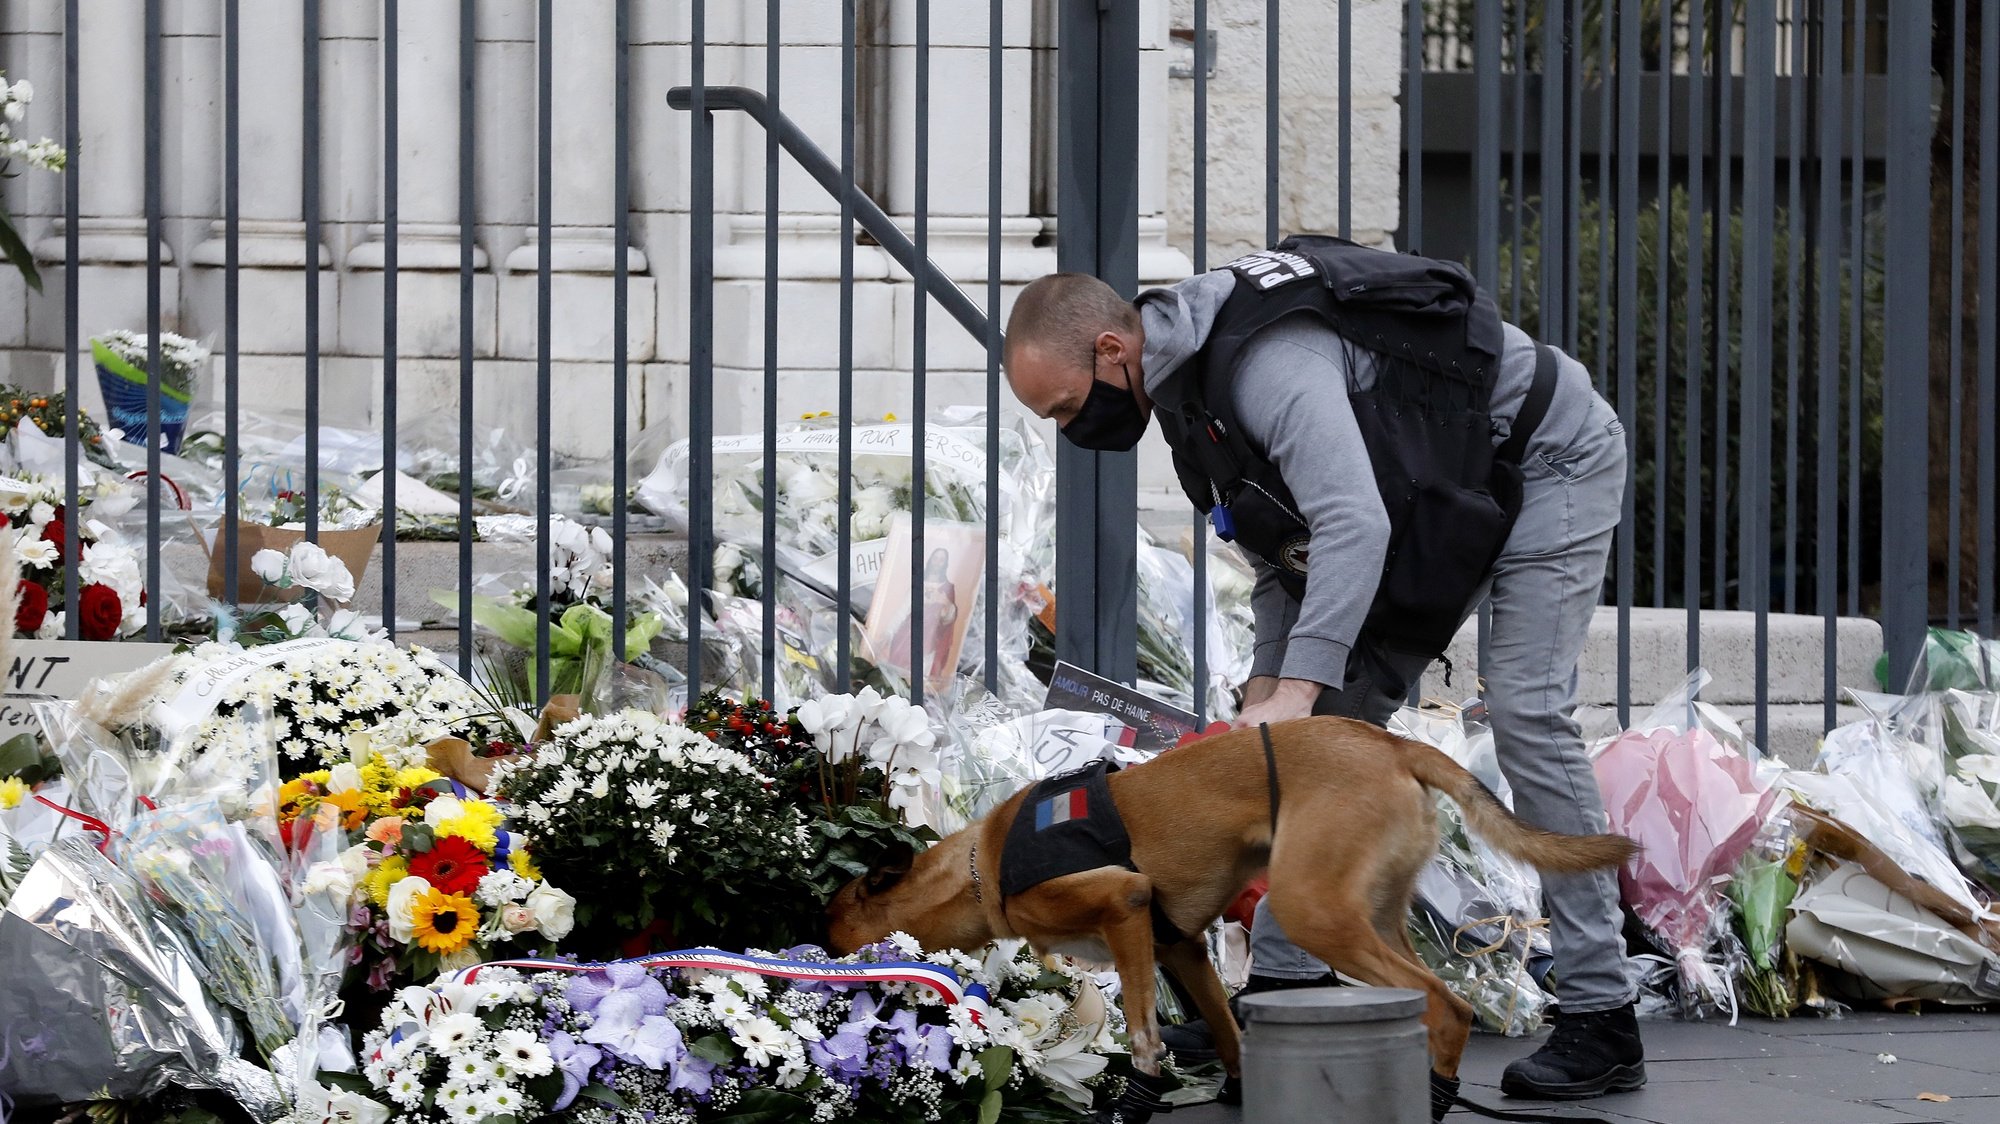 epa08791836 French police officer checks with his dog the flowers in front the Notre Dame Basilica before the first mass after the Knife attack in Nice, France, 01 November 2020. Three people have died in a terror attack. The attack comes less than a month after the beheading of a French middle school teacher in Paris on 16 October.  EPA/SEBASTIEN NOGIER